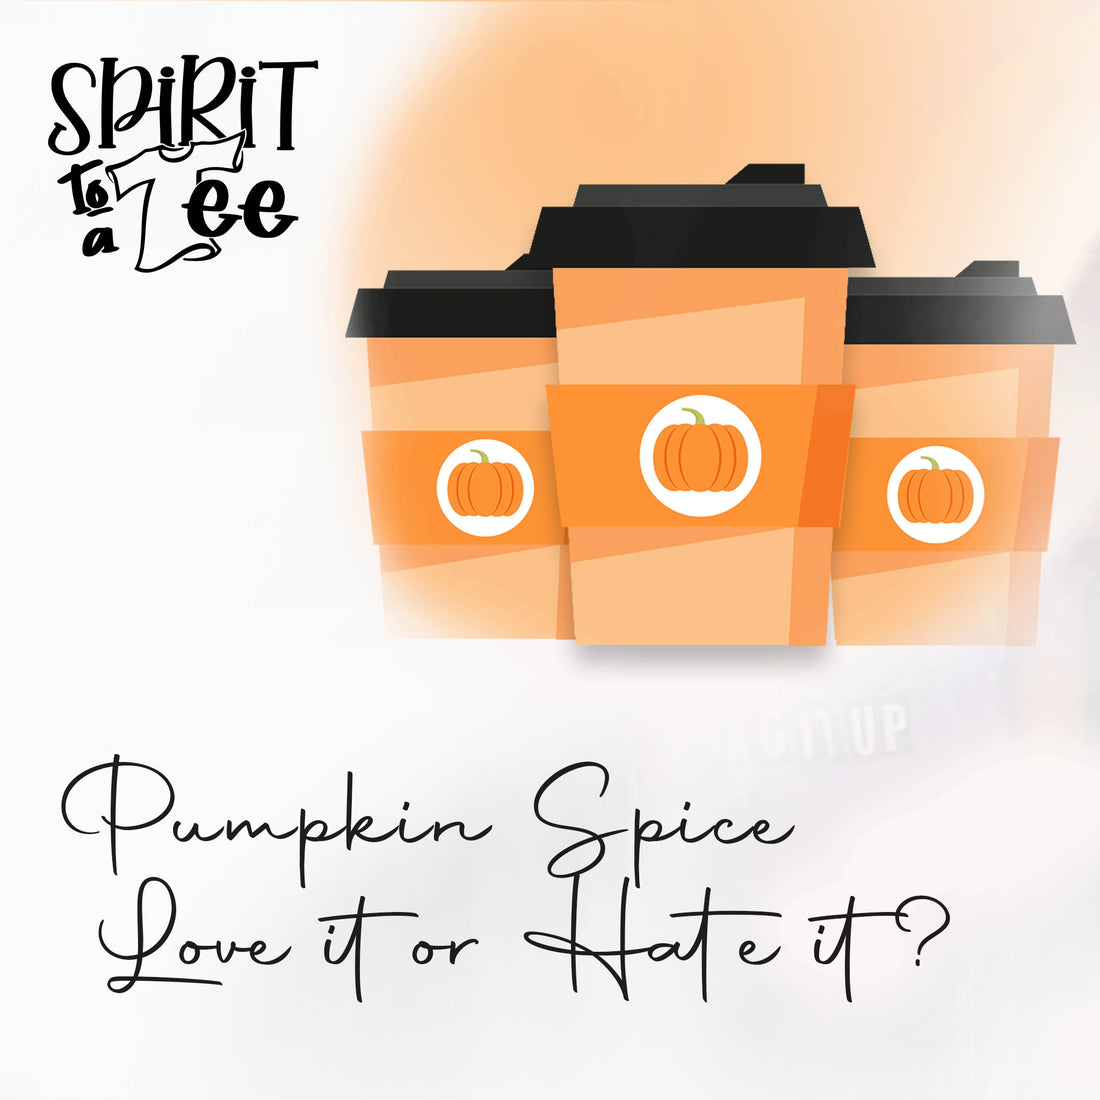 Pumpkin Spice: The Controversial Delight! Love it or Hate it?